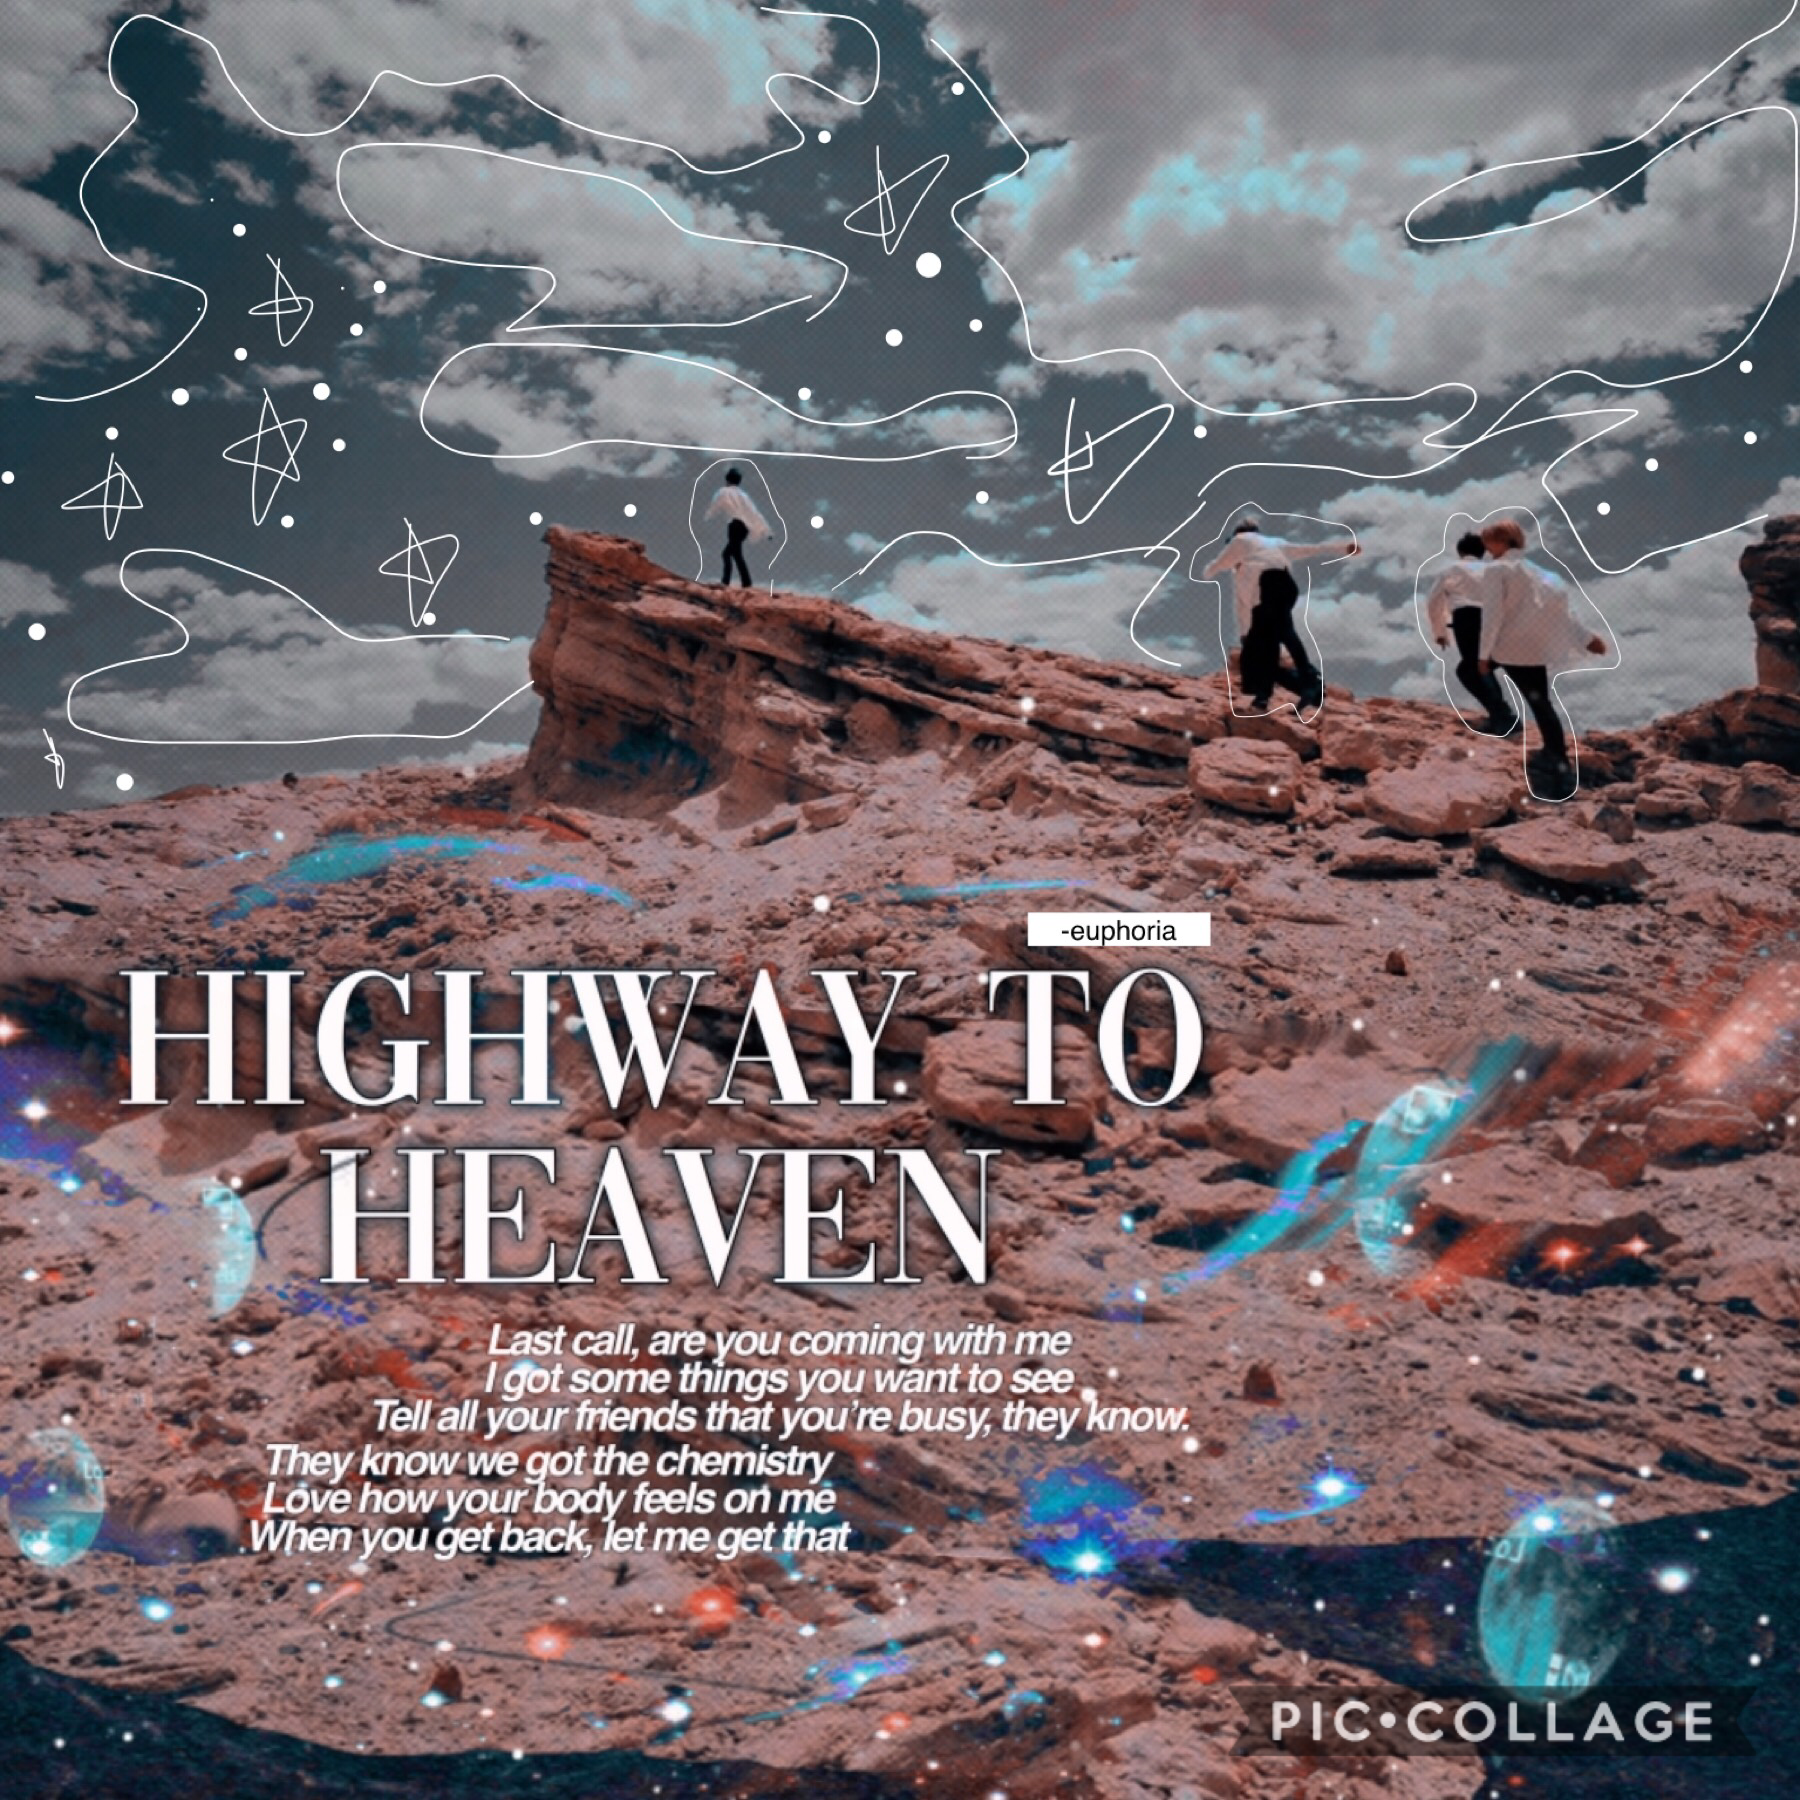 Laylala

I’ve been using a new editing app, tell me what you think

This song is such a bop I can’t

They aesthetic S are just so Uh

QOTD: what is your favourite NCT song

AOTD: from 127, it’s highway to heaven, from U it’s boss from dream, it’s we go up